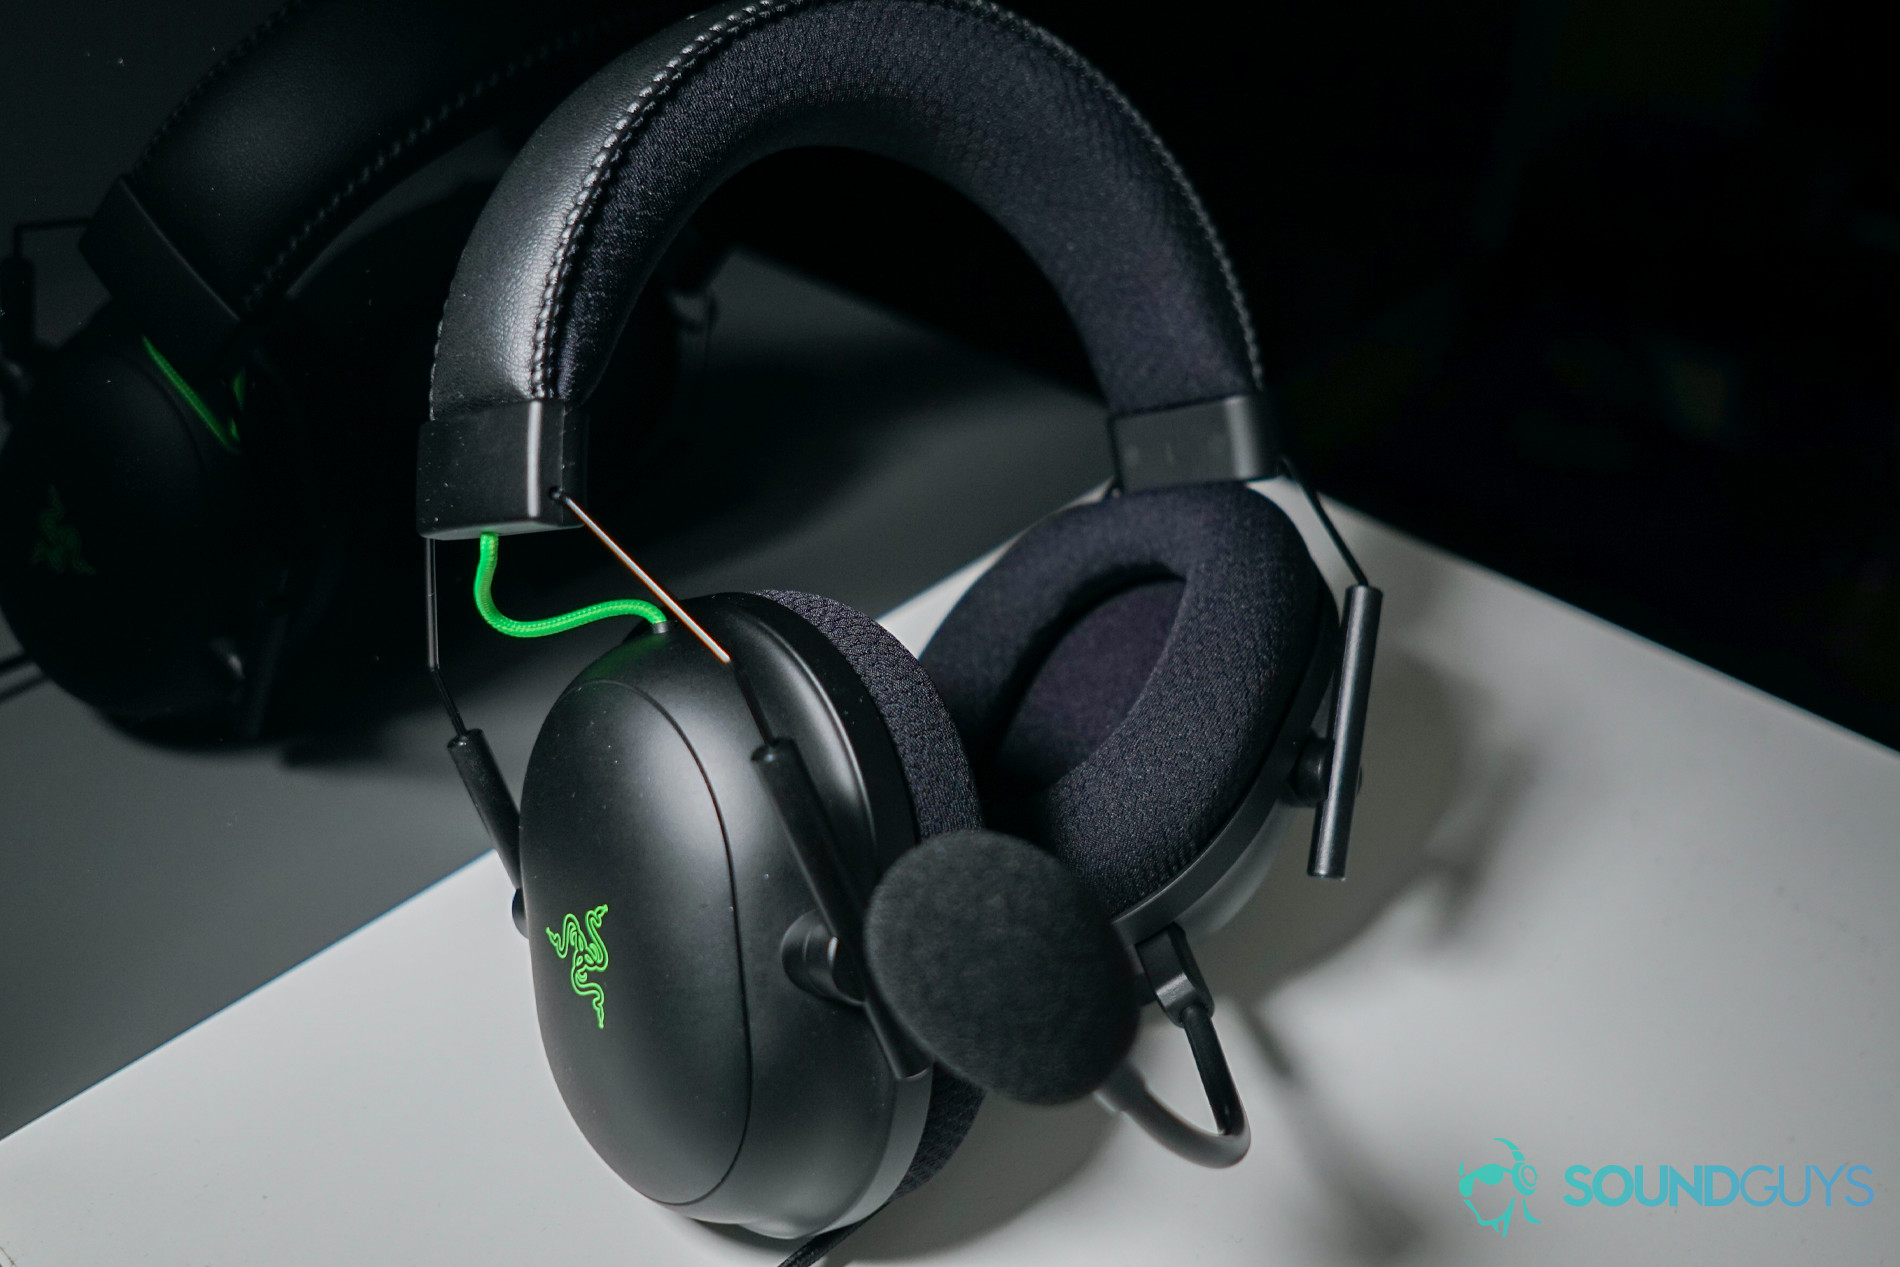 The Razer BlackShark V2 gaming headset sits in a white box in front of a reflective black surface